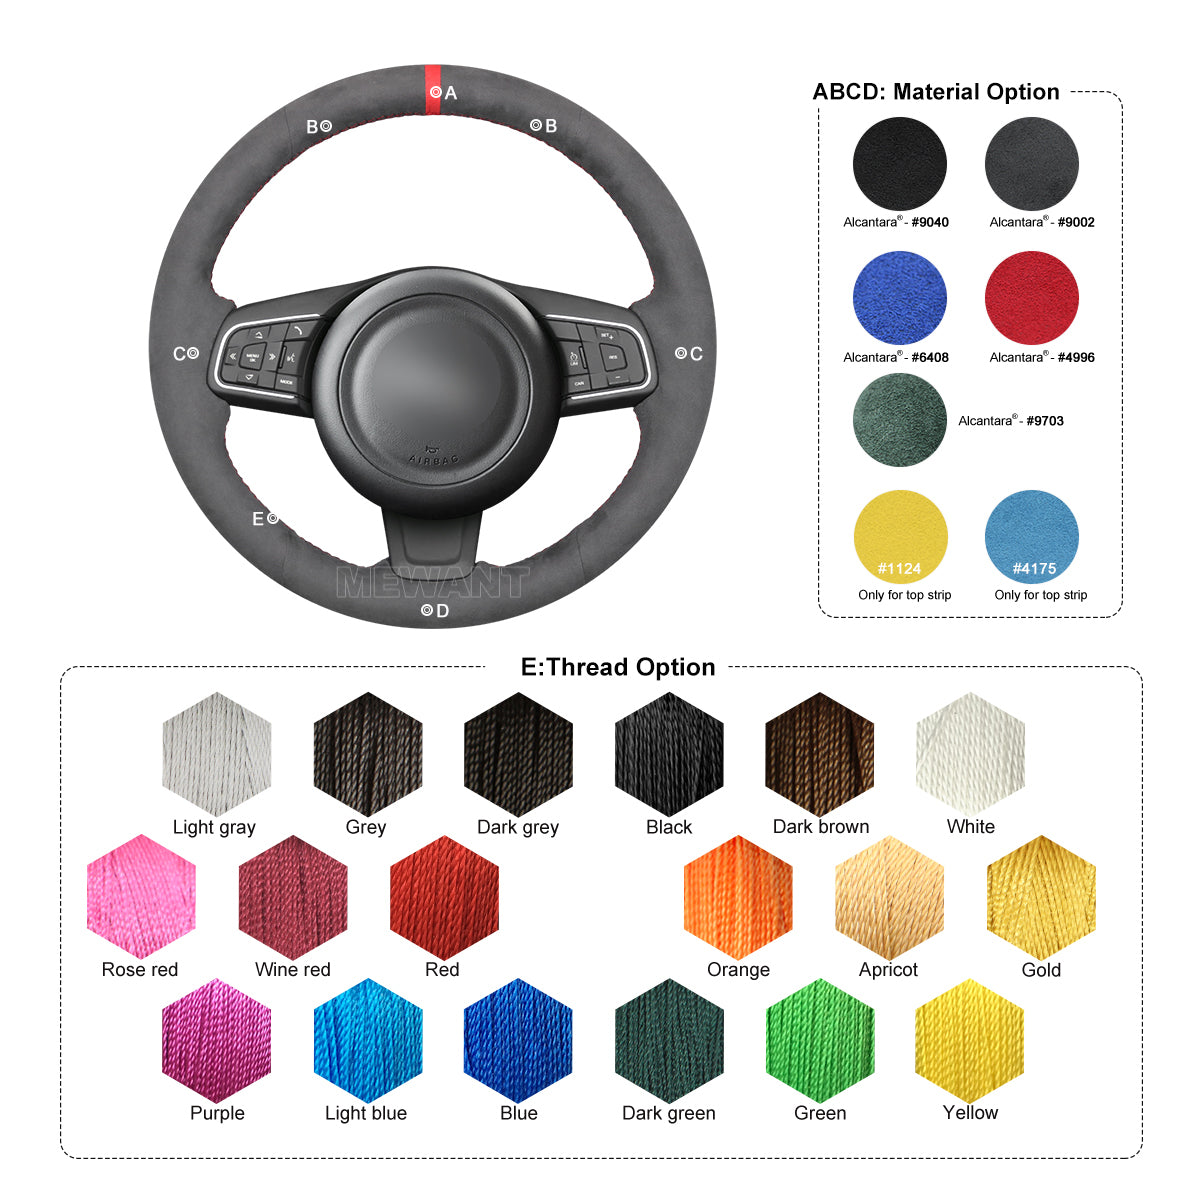 Car steering wheel cover for Jaguar E-Pace 2017-2019 / F-Pace 2016-2017 / XE 2015-2017 / XF 2016-2017